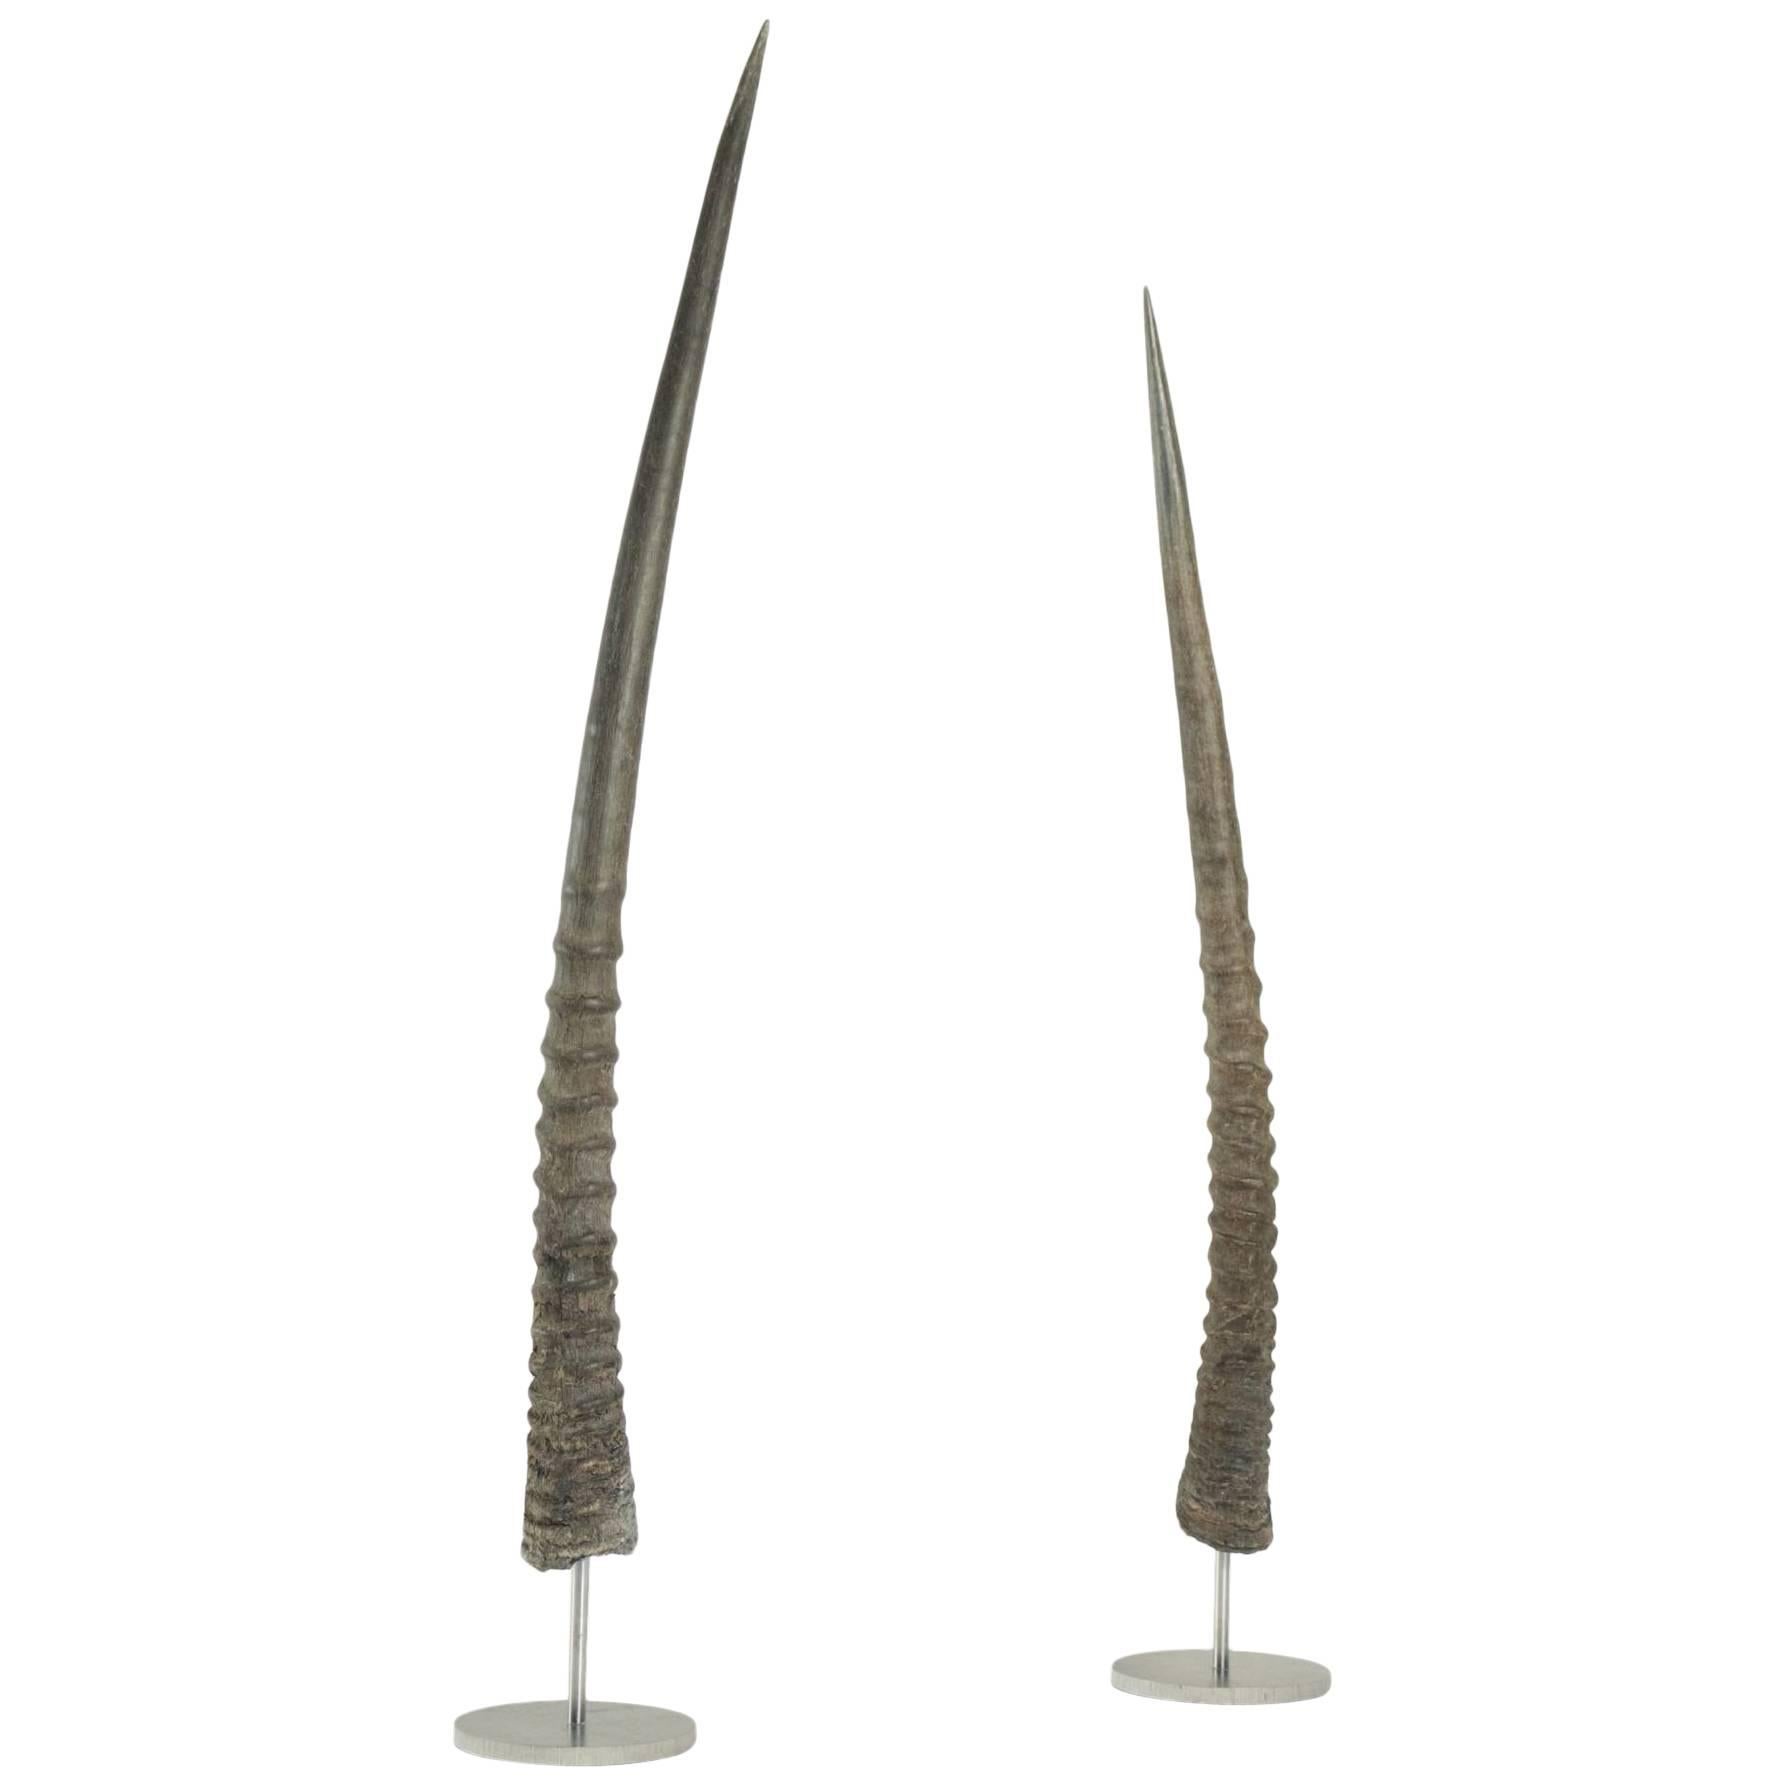 Pair of African Antelope Horns Mounted on Base of Stainless Steel